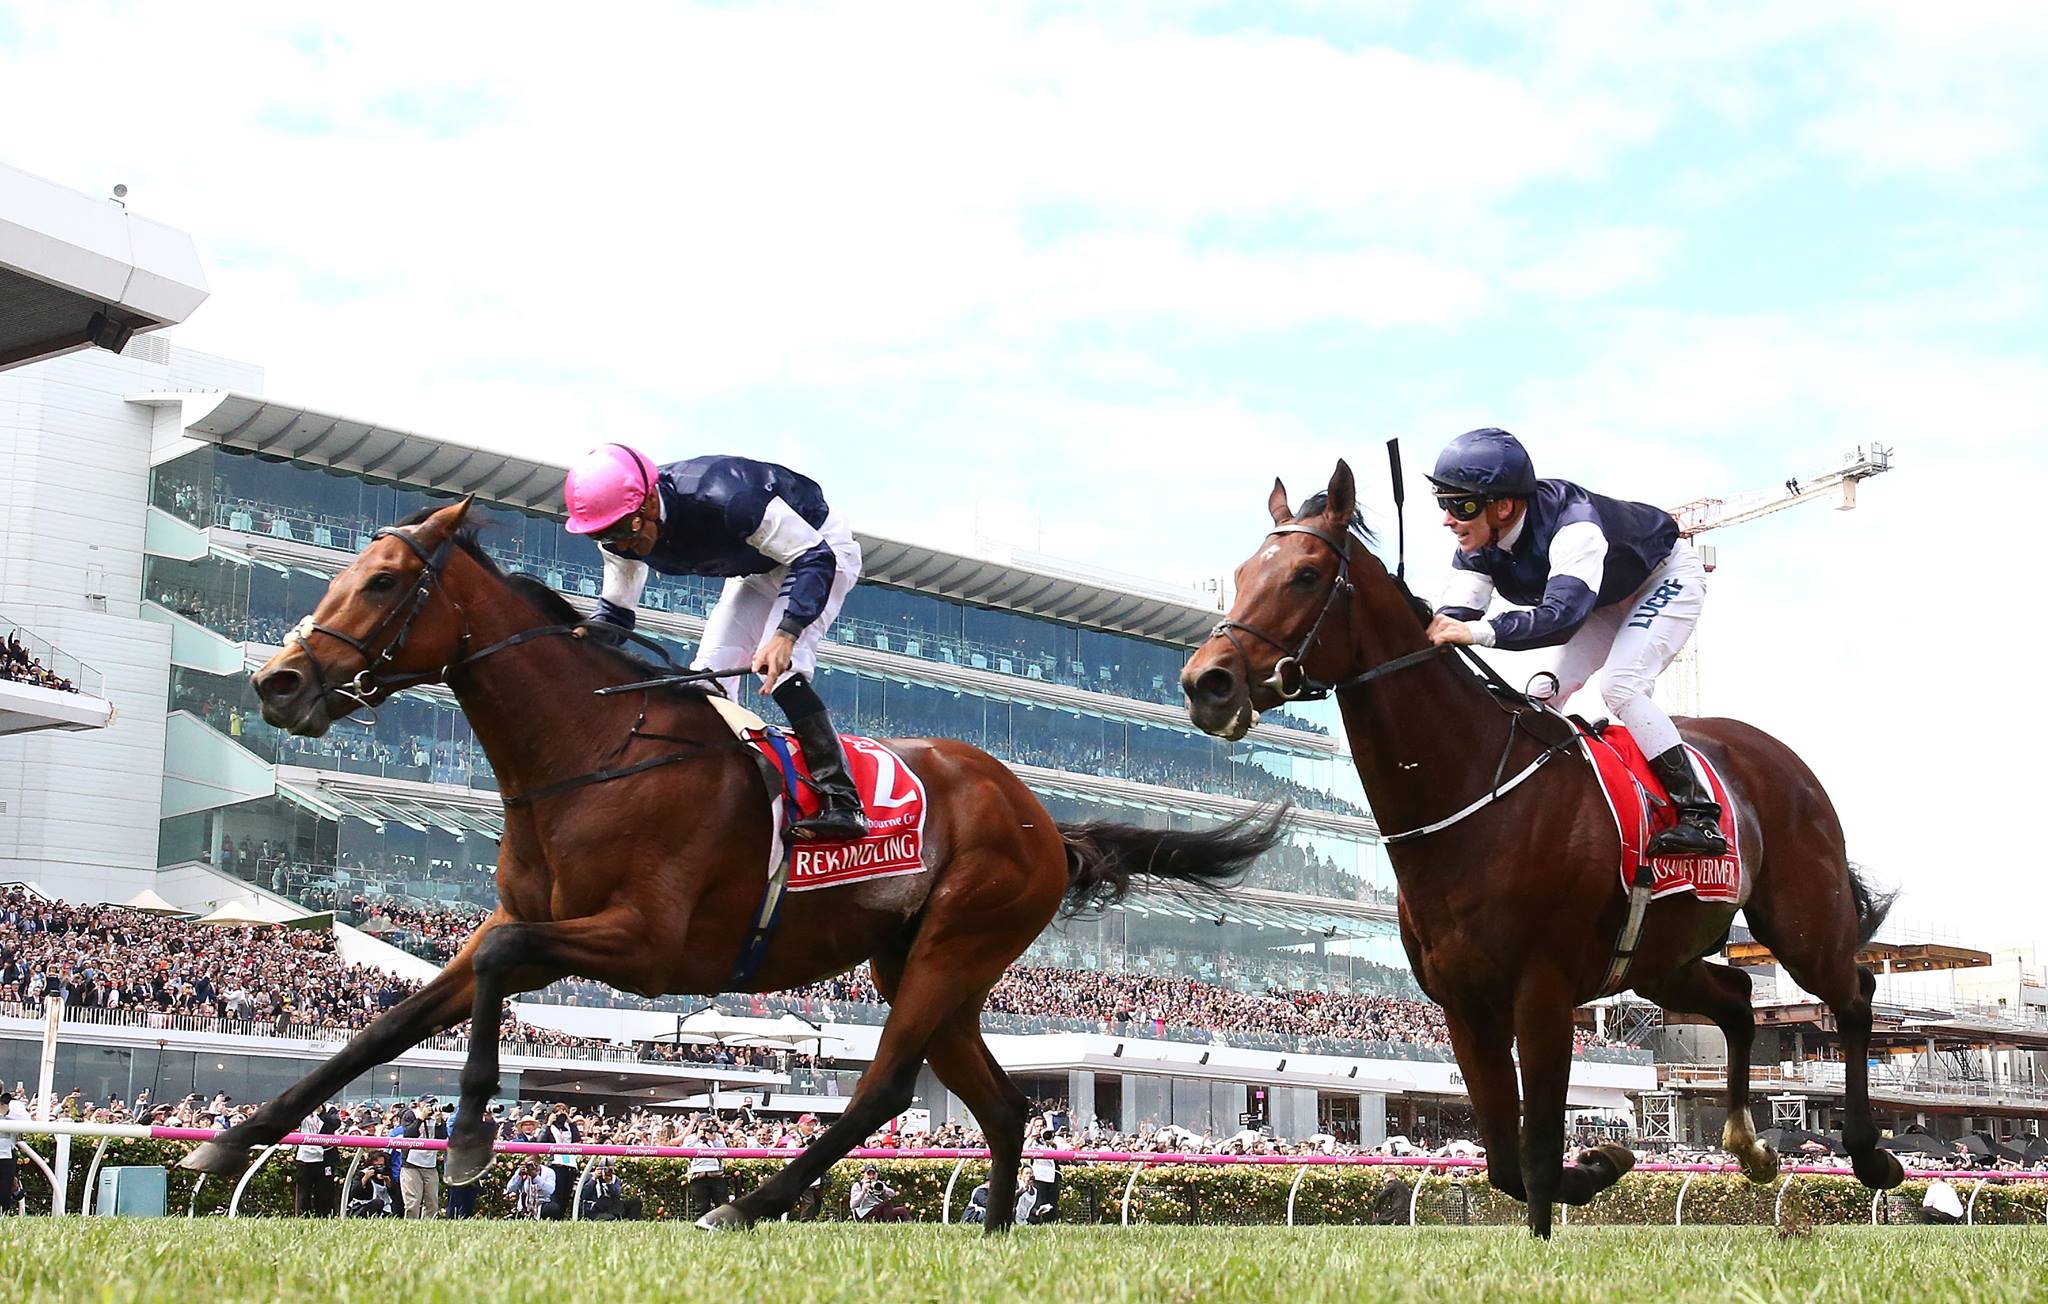 Rekindling Gives Young O’Brien Melbourne Cup Glory